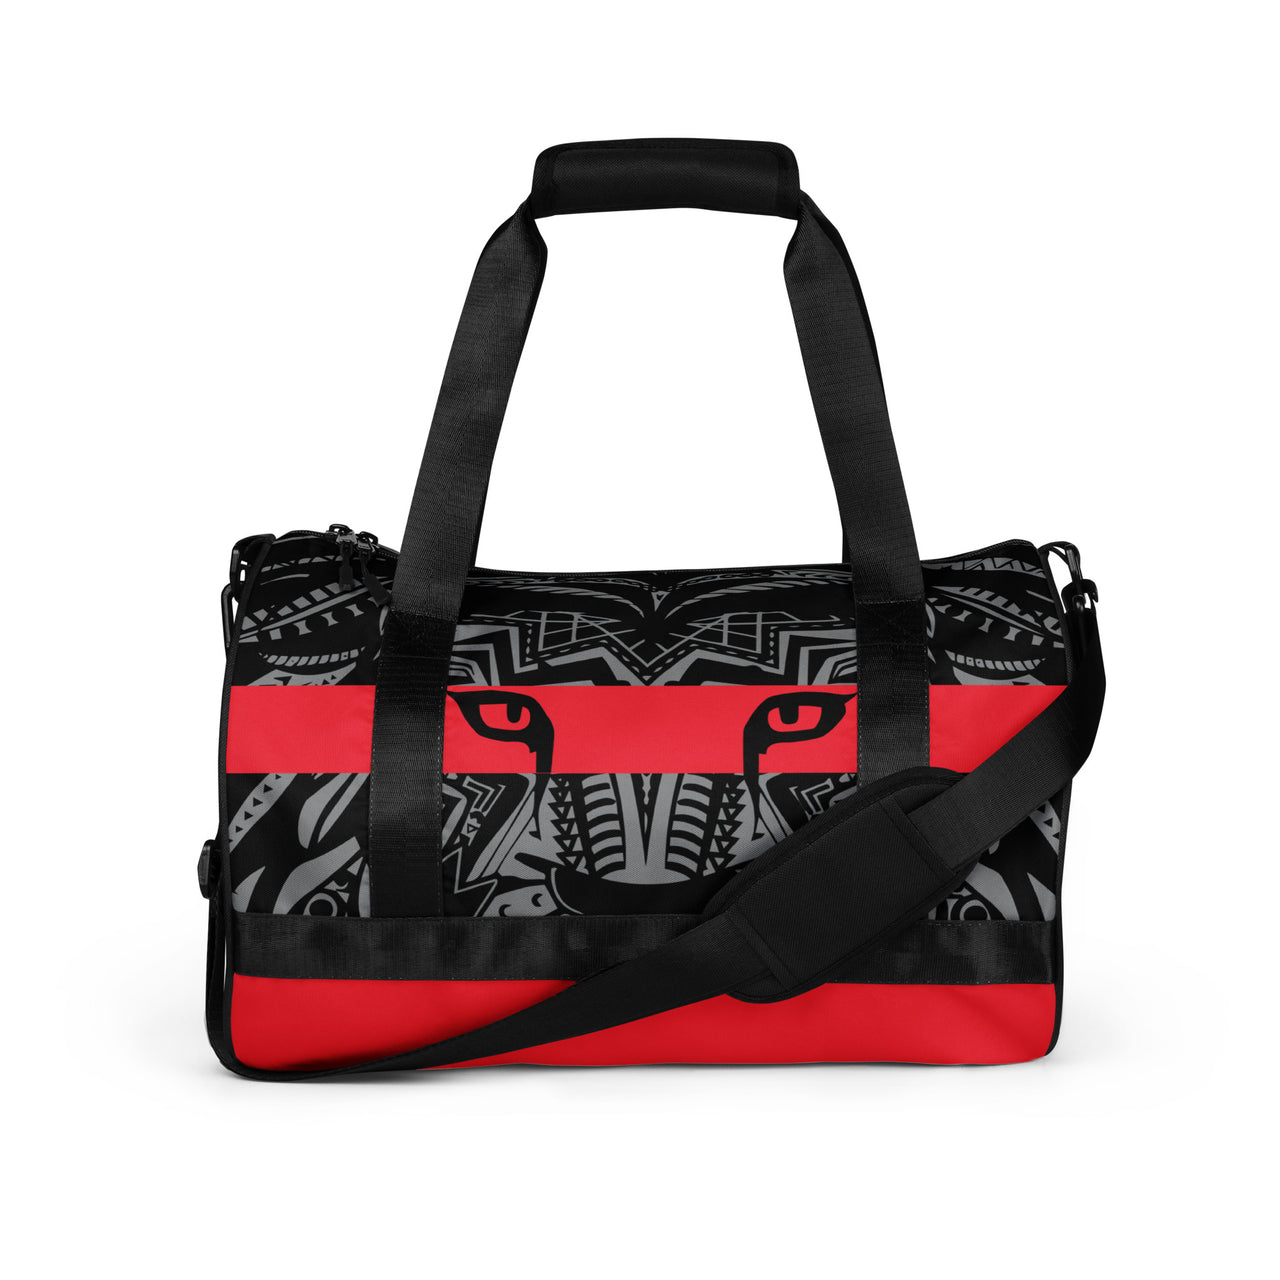 NXXT Red Eye Lion All-over print gym bag - Shady Lion Coffee Co.